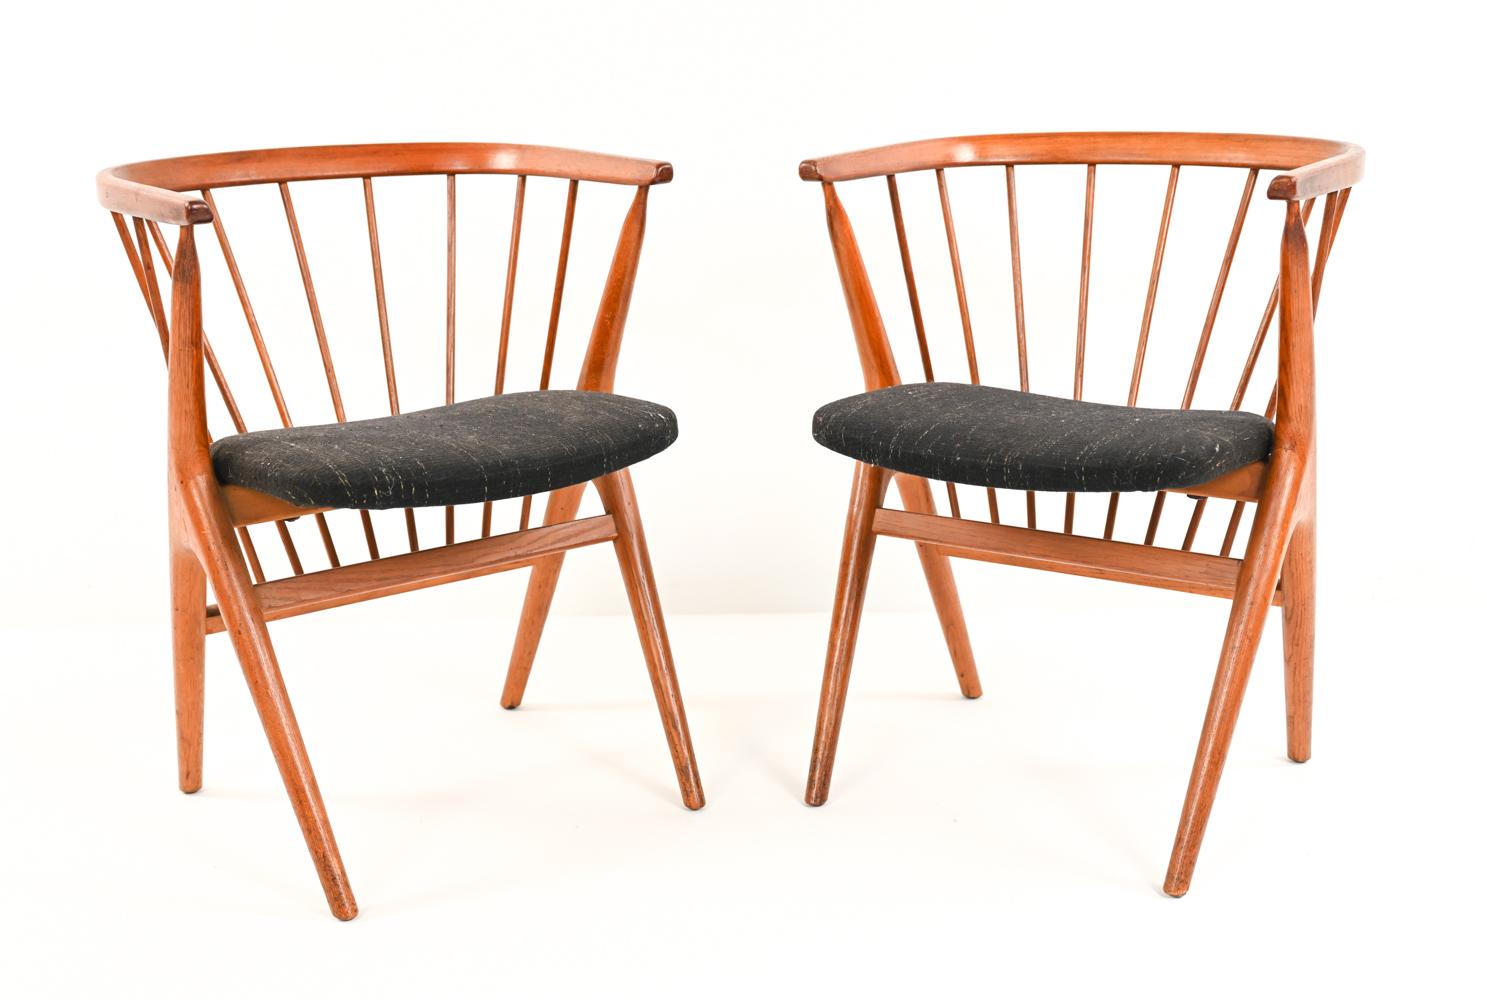 '6' Helge Sibast for Sibast No. 8 Teak Dining Chairs 6